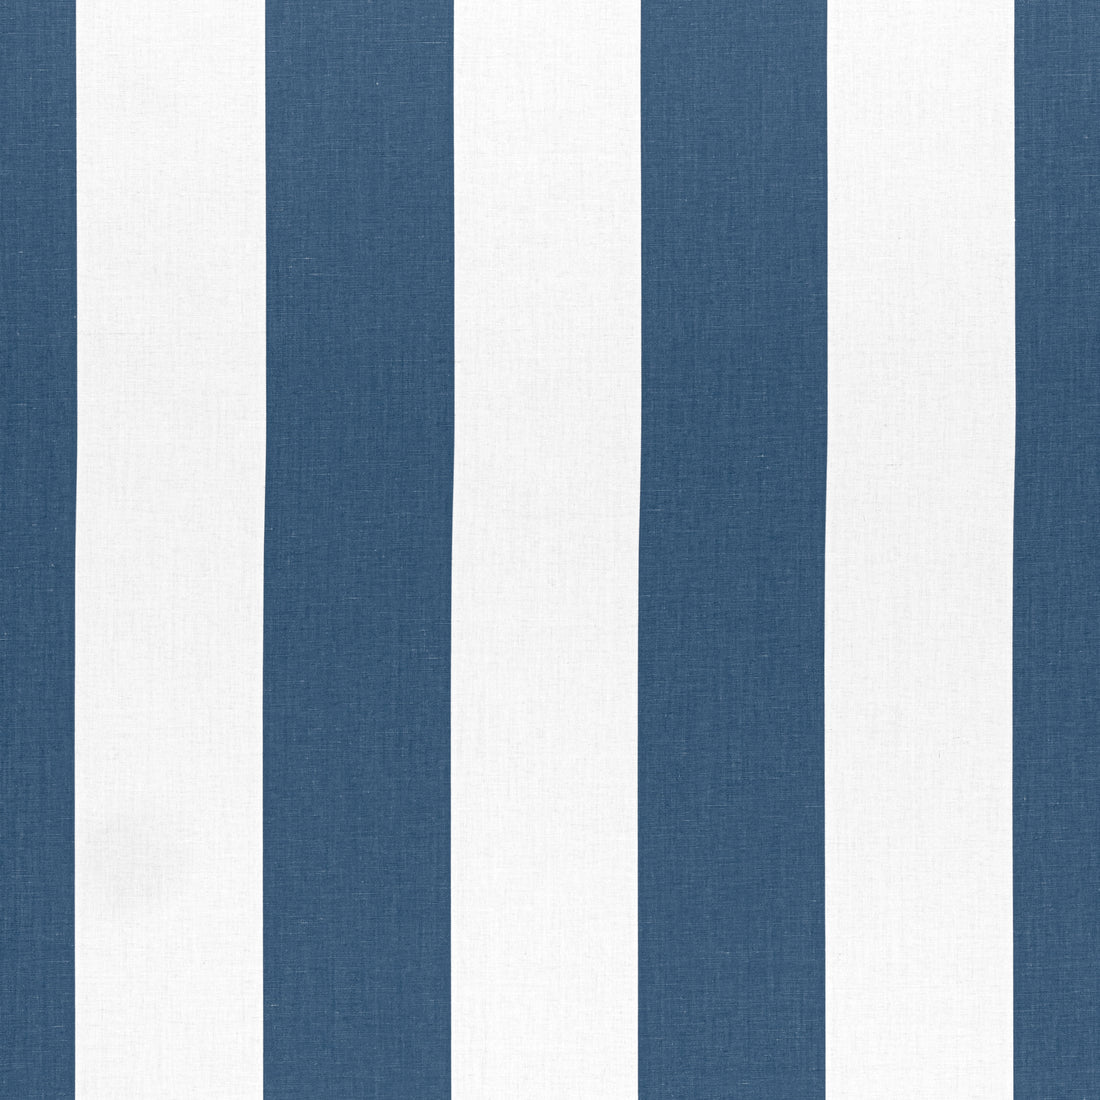 Bergamo Stripe fabric in navy color - pattern number W713637 - by Thibaut in the Grand Palace collection